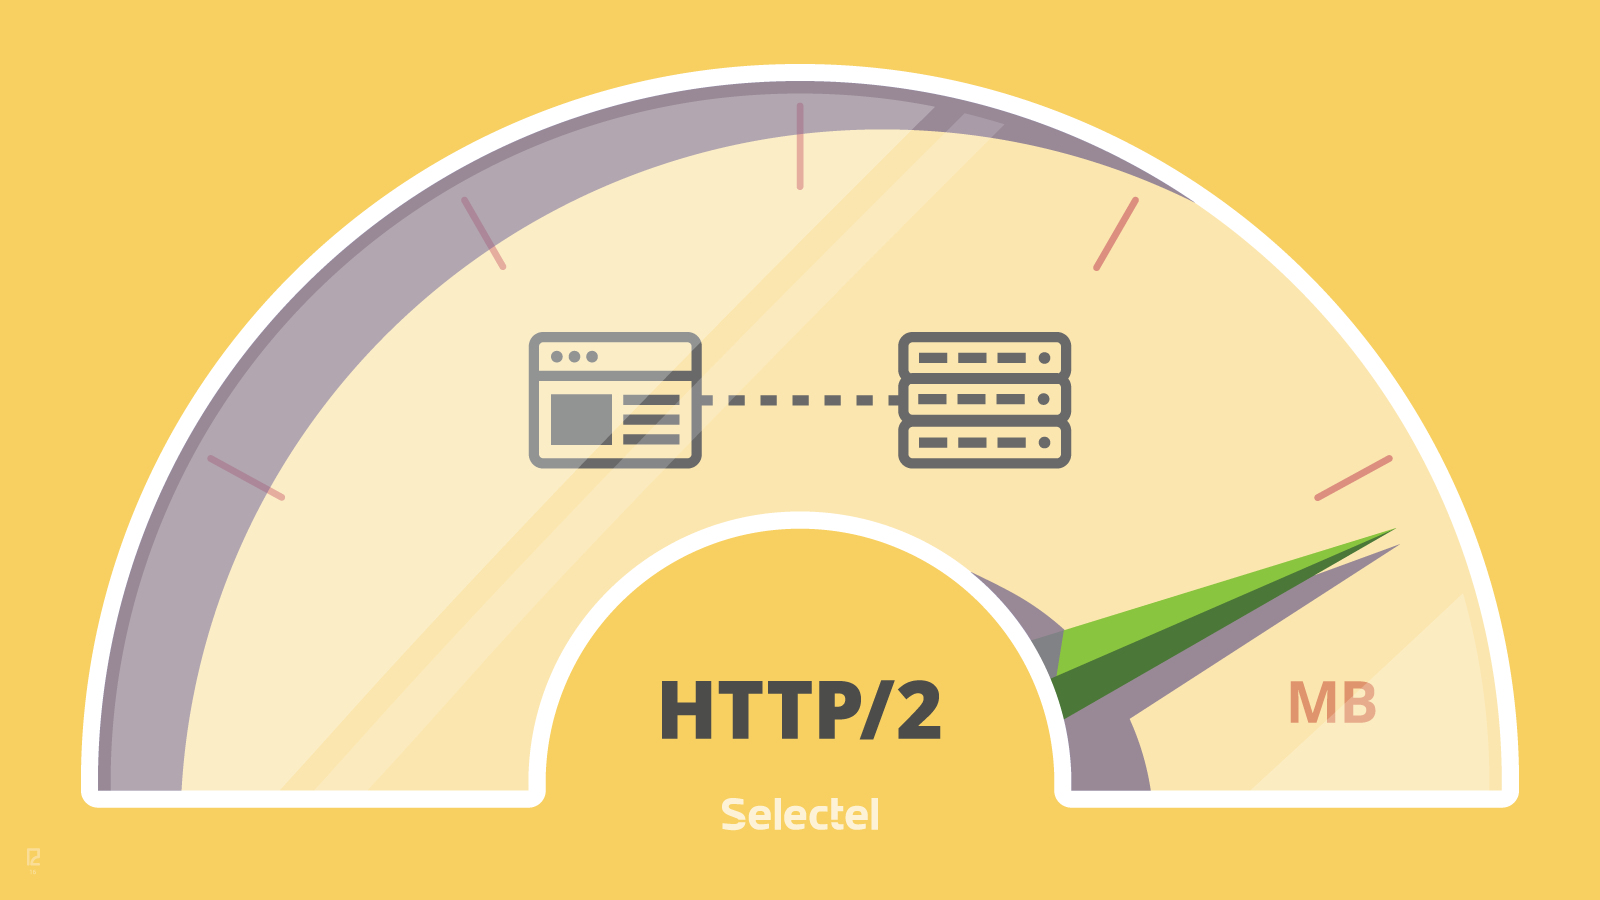 Move to HTTP/2 instead of HTTP/1